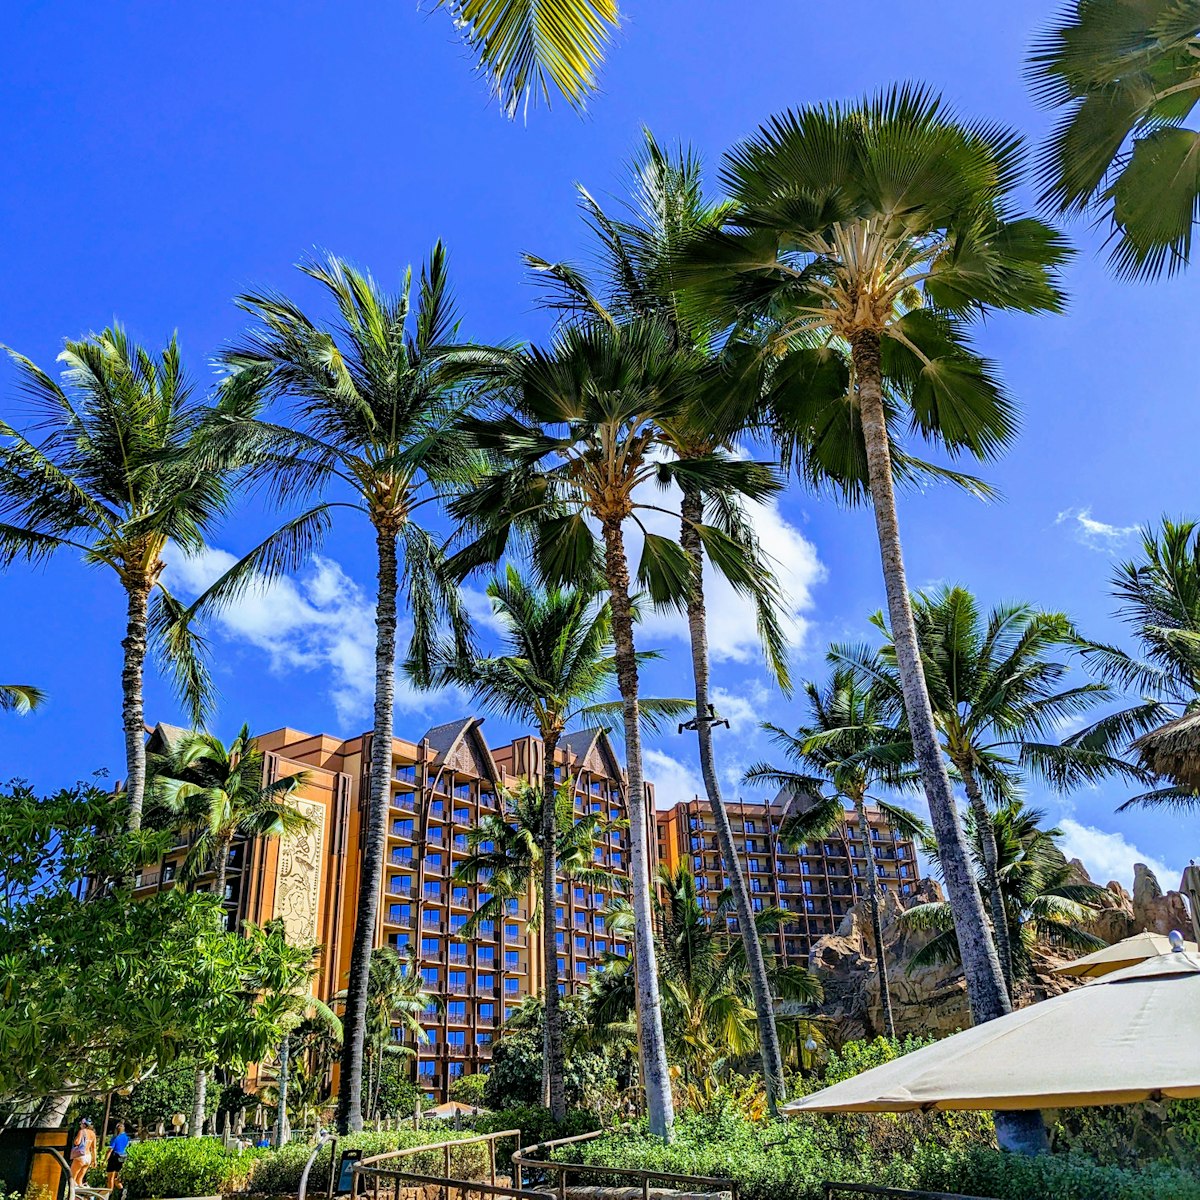 Oahu - August 8, 2023: Disney Aulani tropical hotel surrounded by palm trees.
1714031929
urban, building, tranquil, view, paradise, structure, tropical, hawaii, resort, attraction, polynesian, ko olina, aulani, disney resort